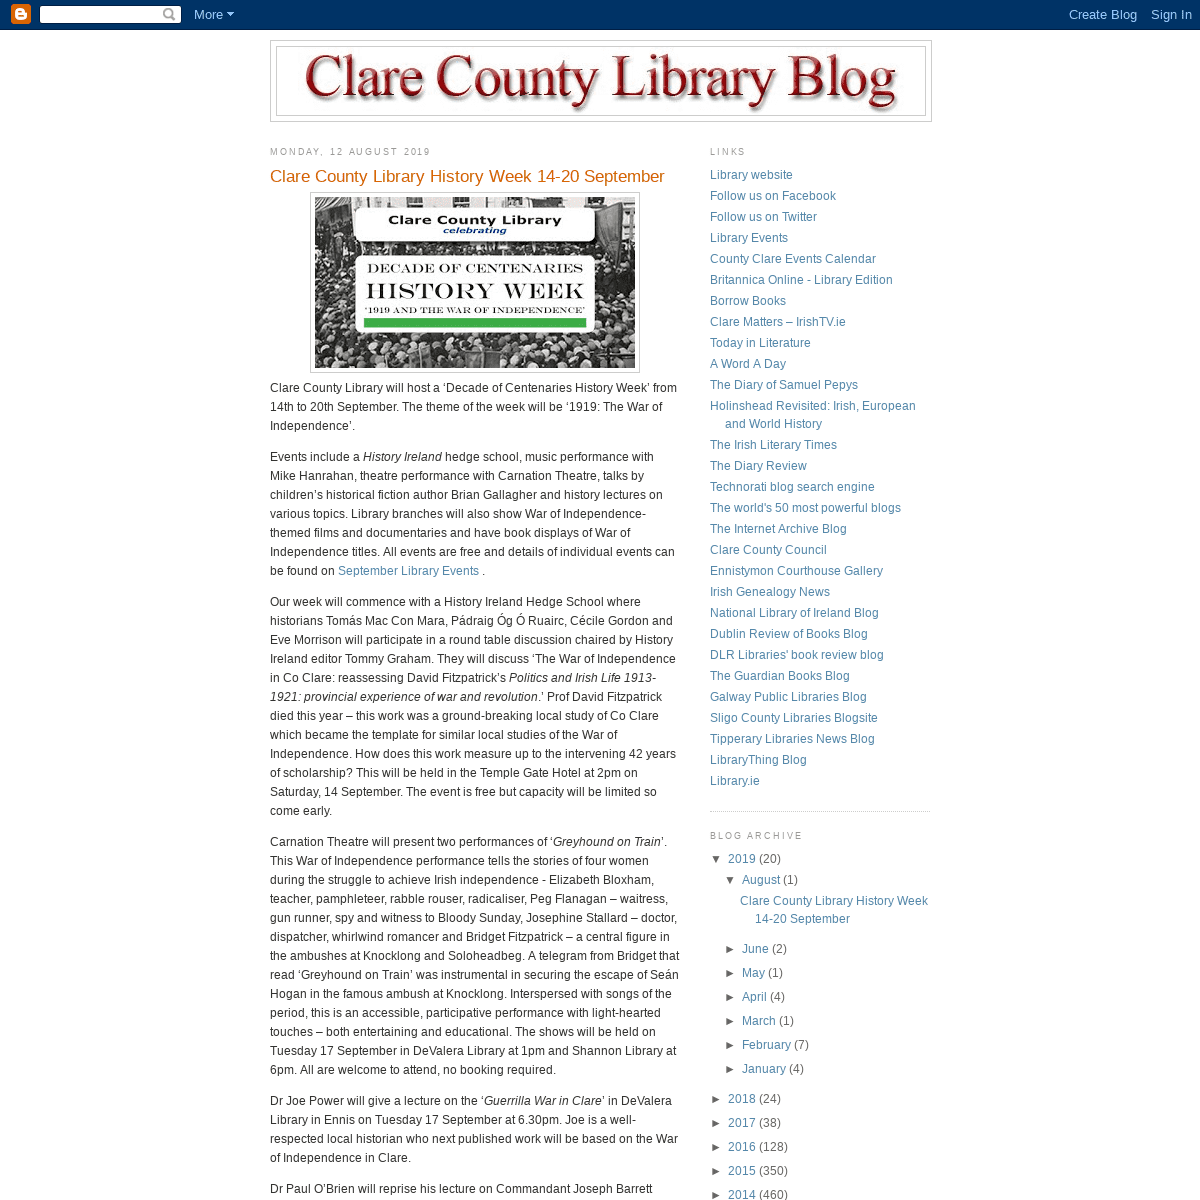 Clare County Library Blog